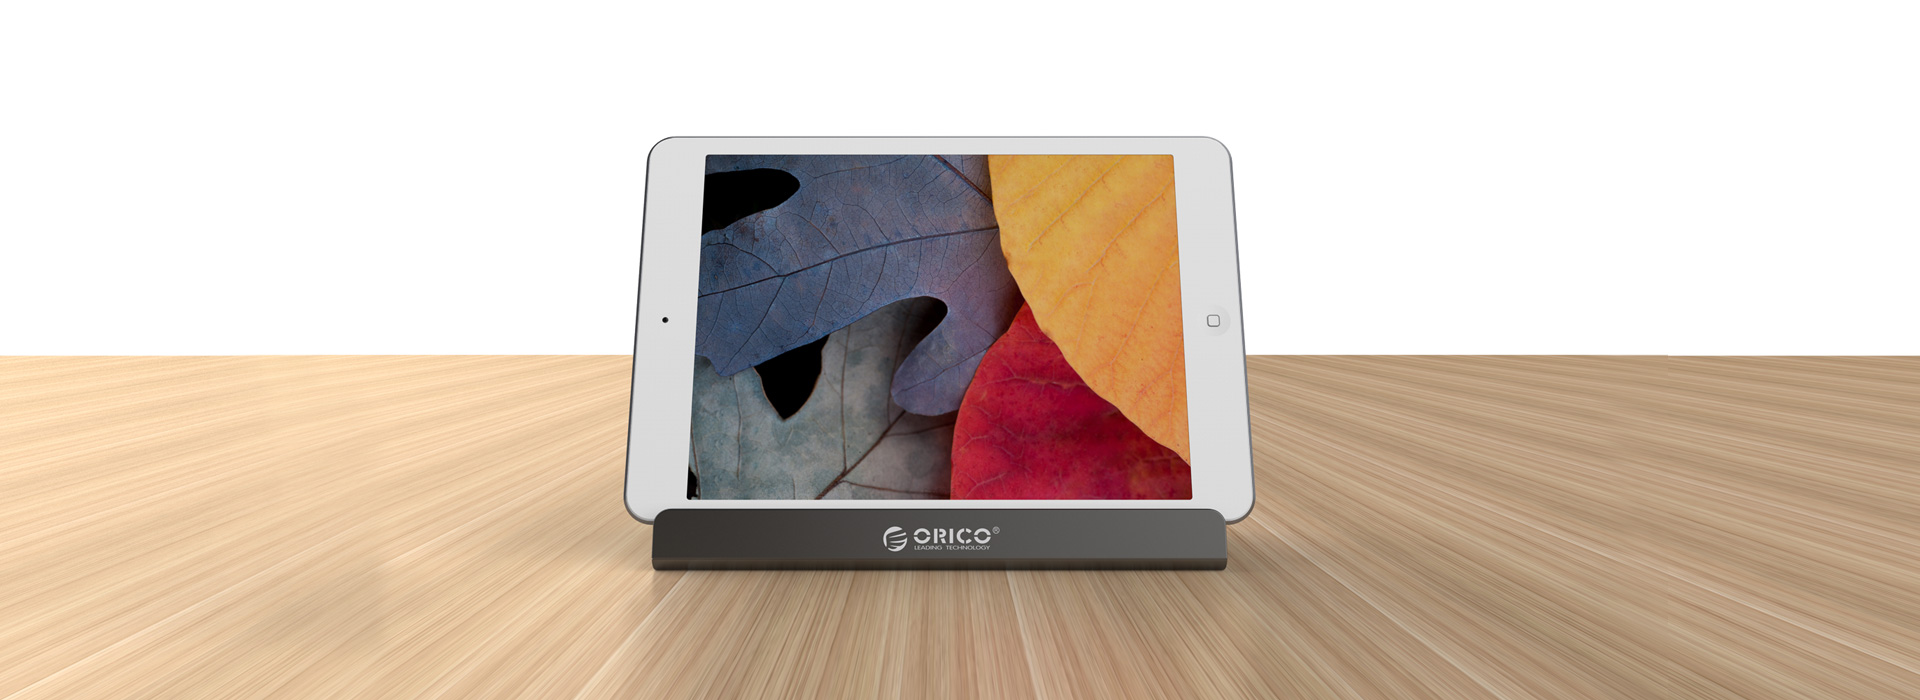 ORICO Universal Docking Station for Cellphone and Tablet